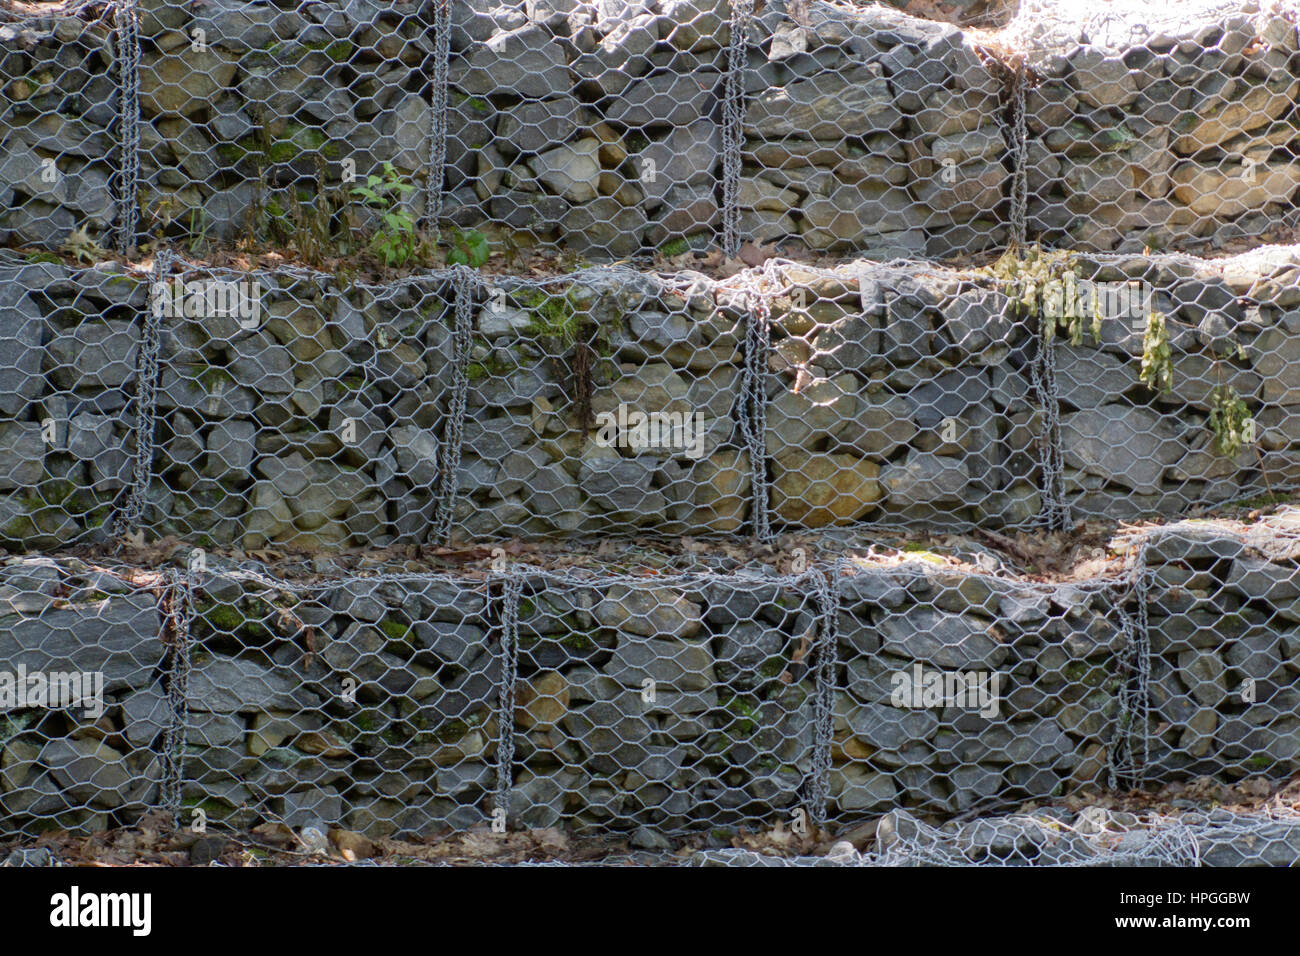 Tiers of screened in Gabion riprap (rock) line a stream to control ...